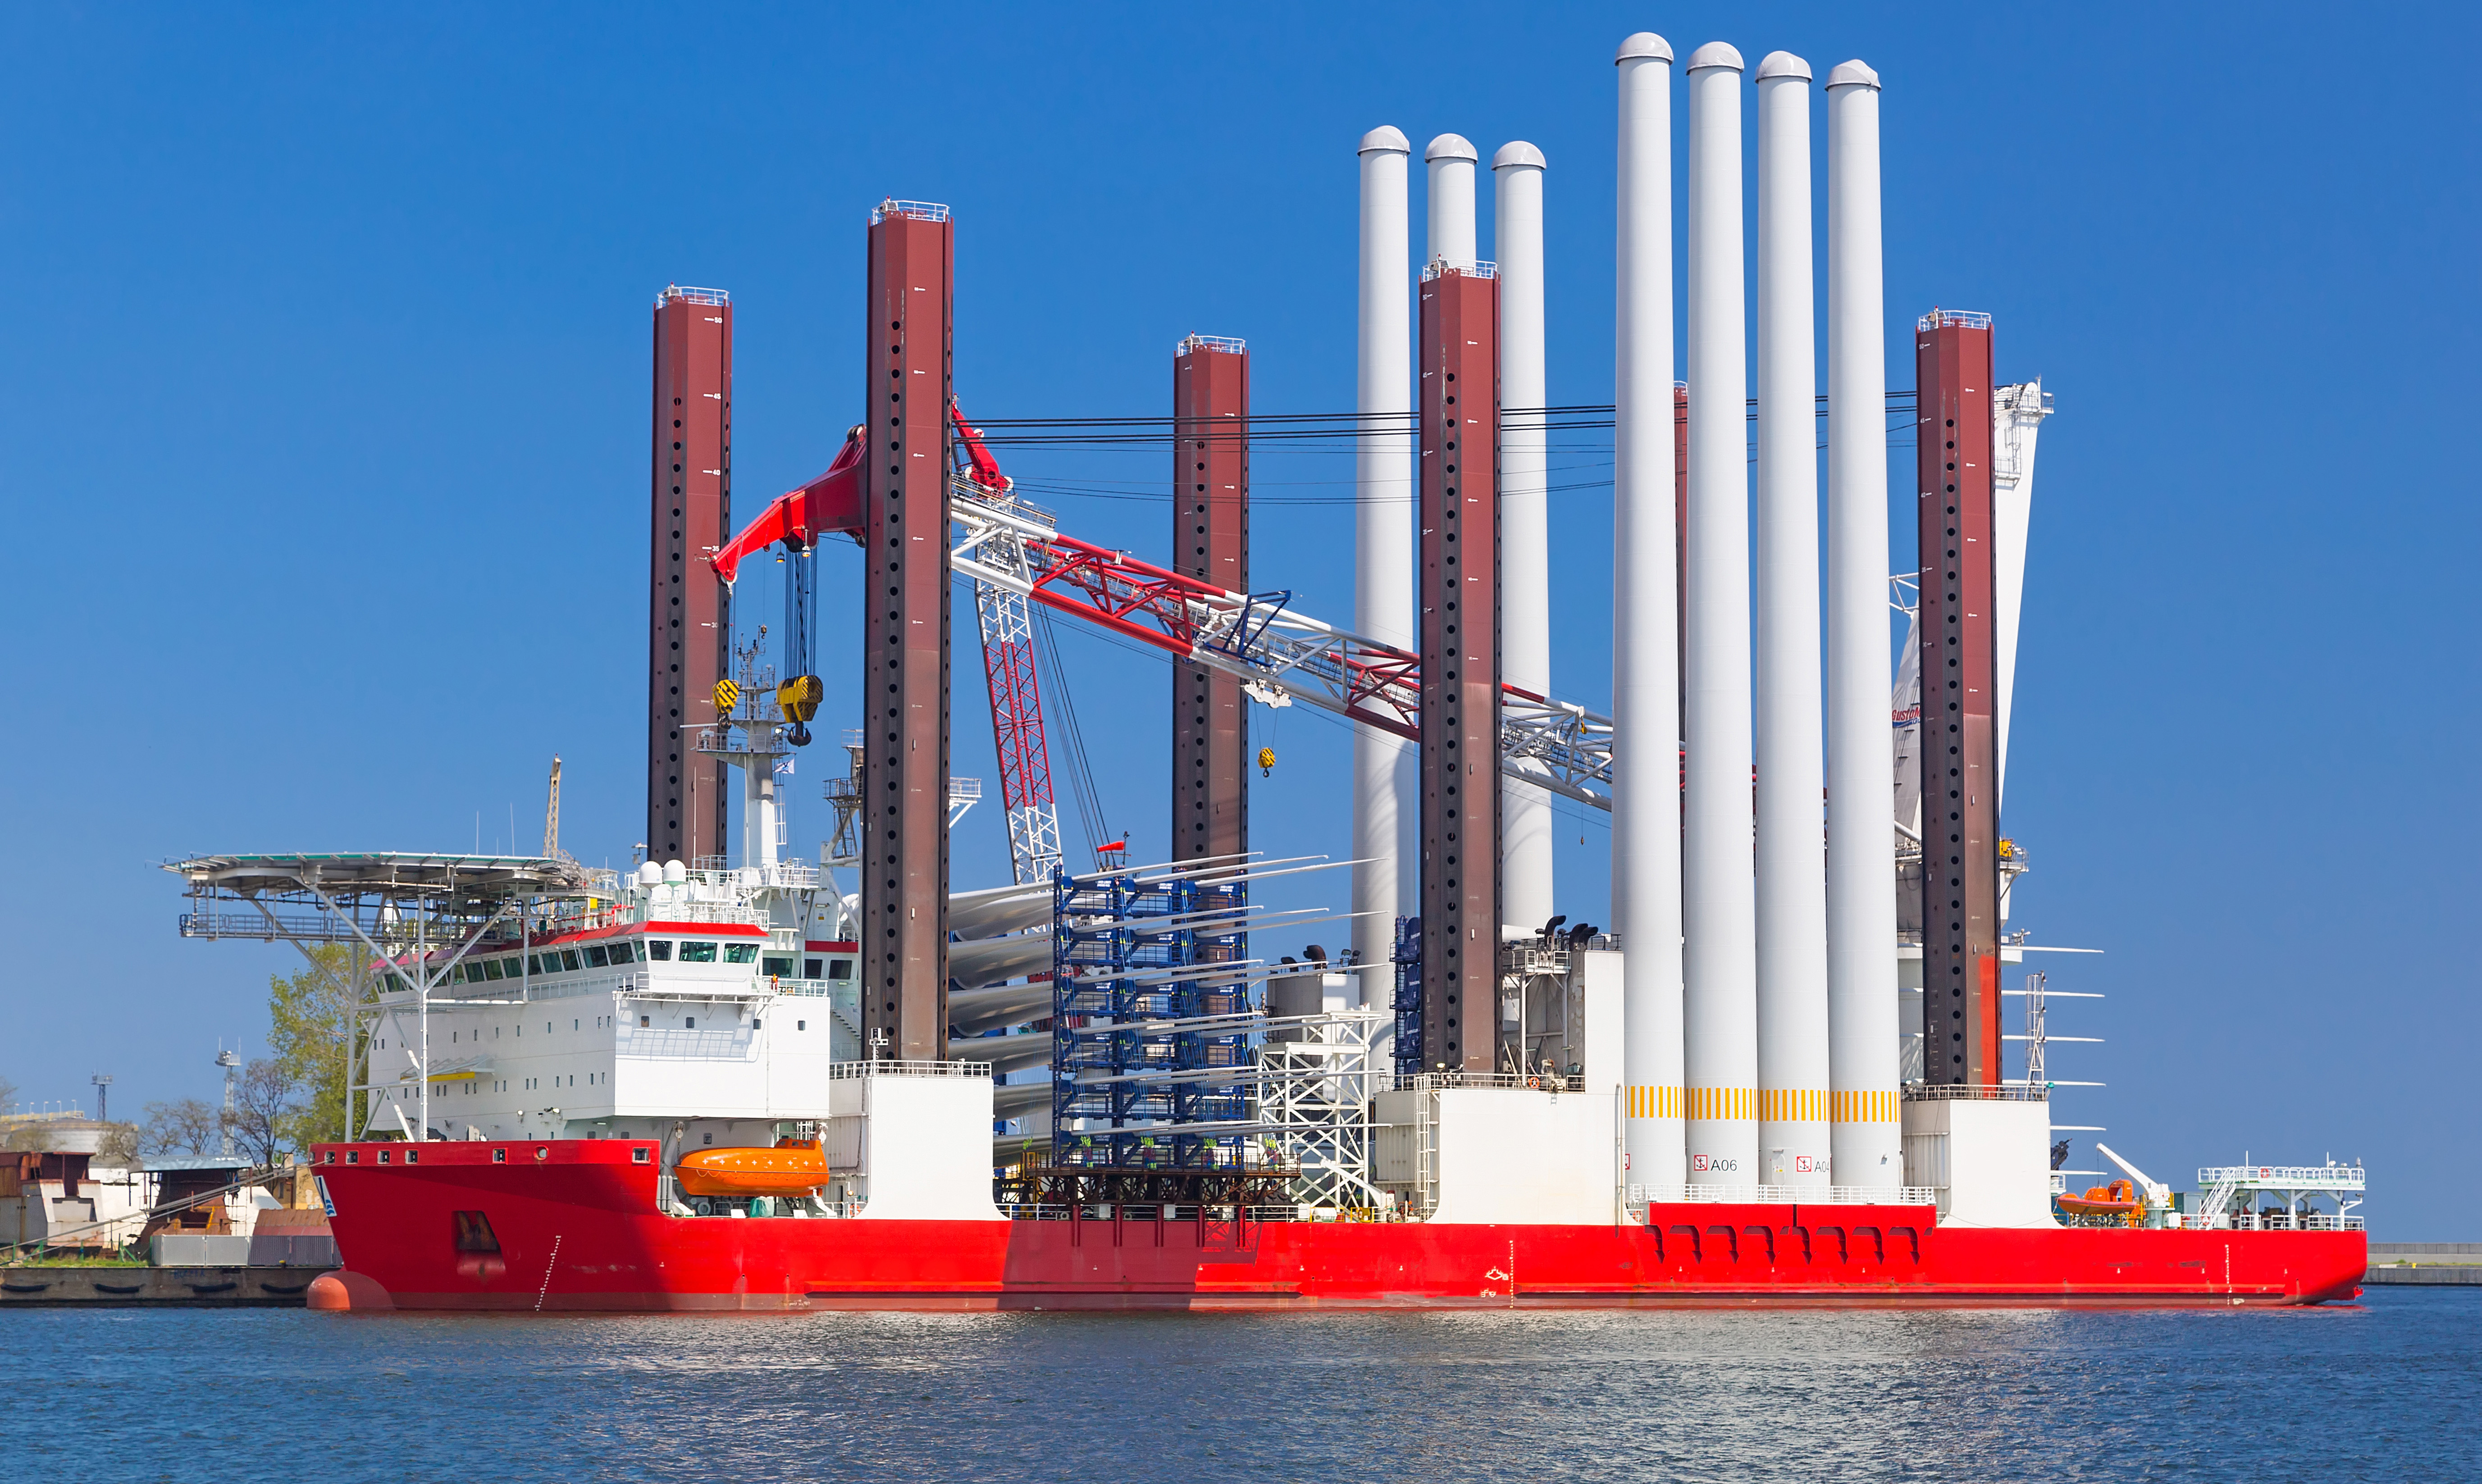 offshore wind construction vessel ready to deploy